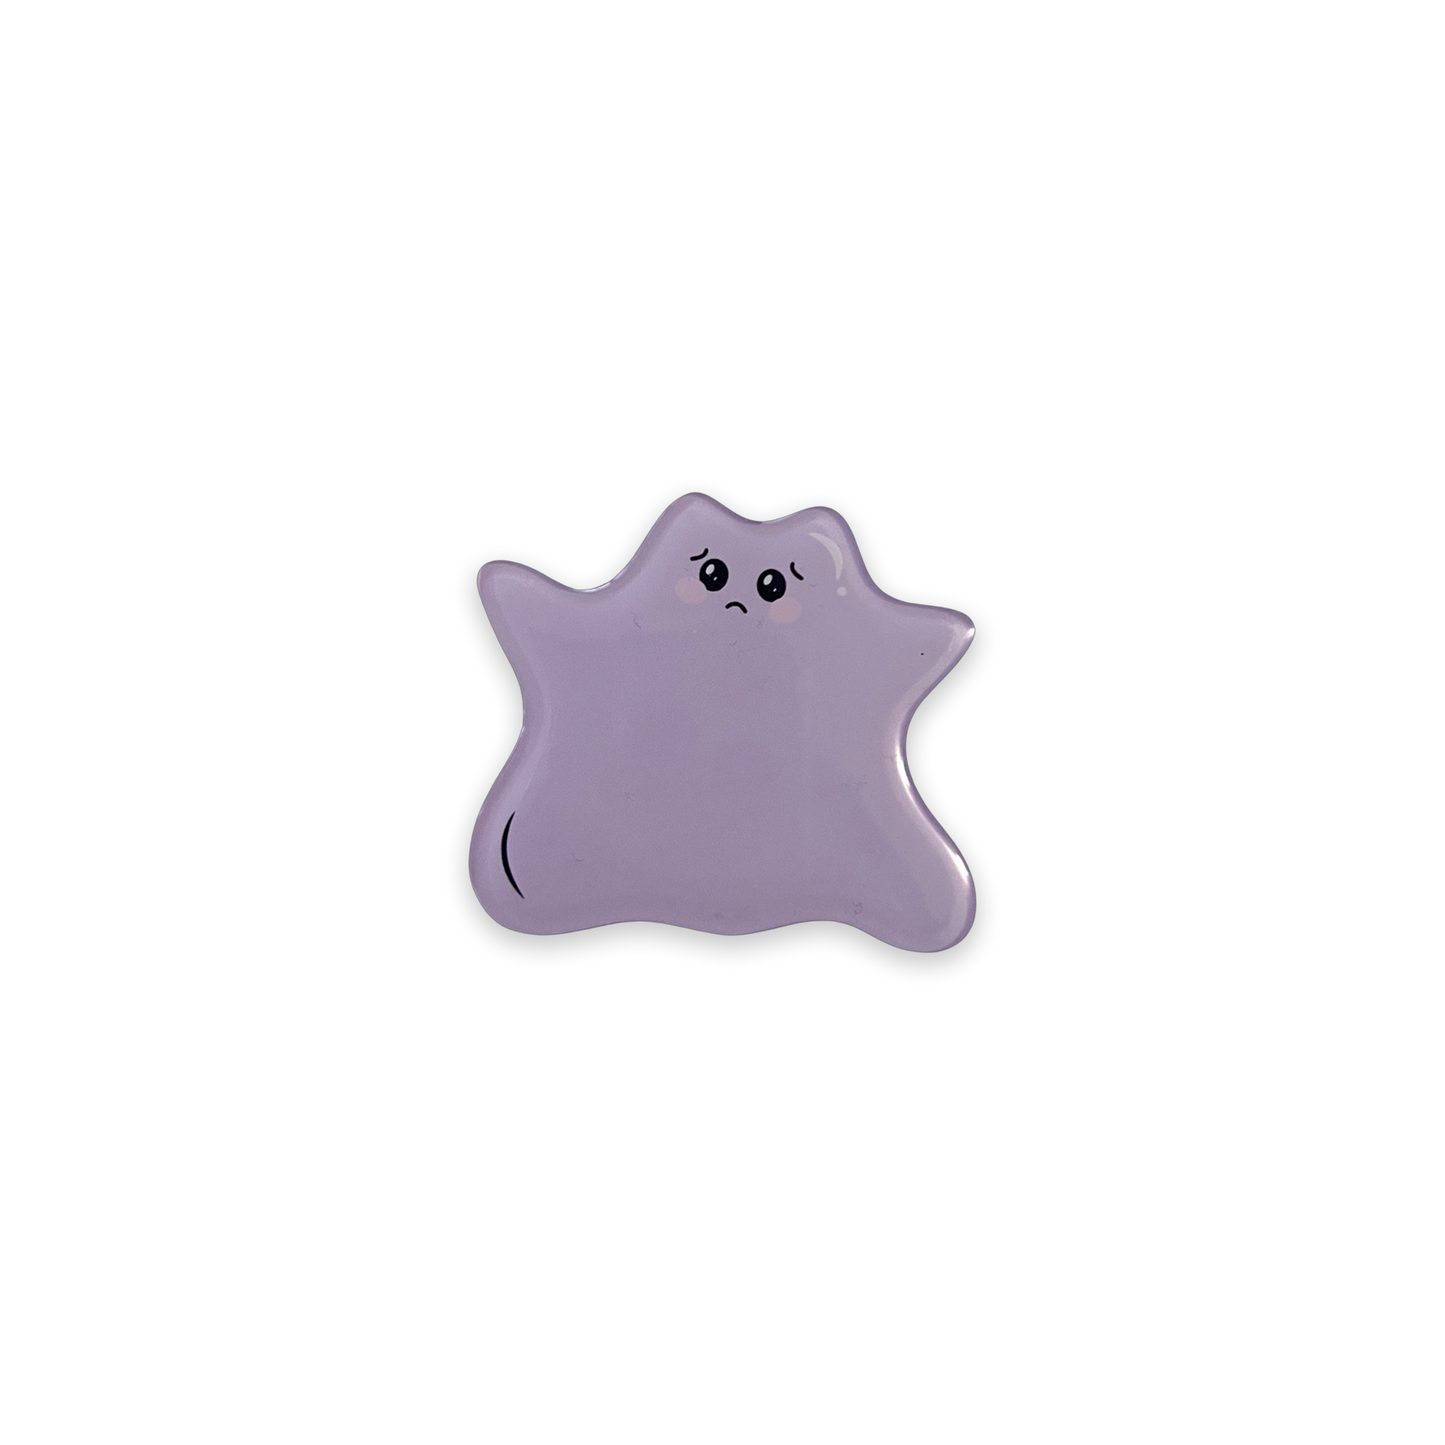 Crybaby Ditto Phone Grip design features Ditto Pokemon looking sad on a pop socket.